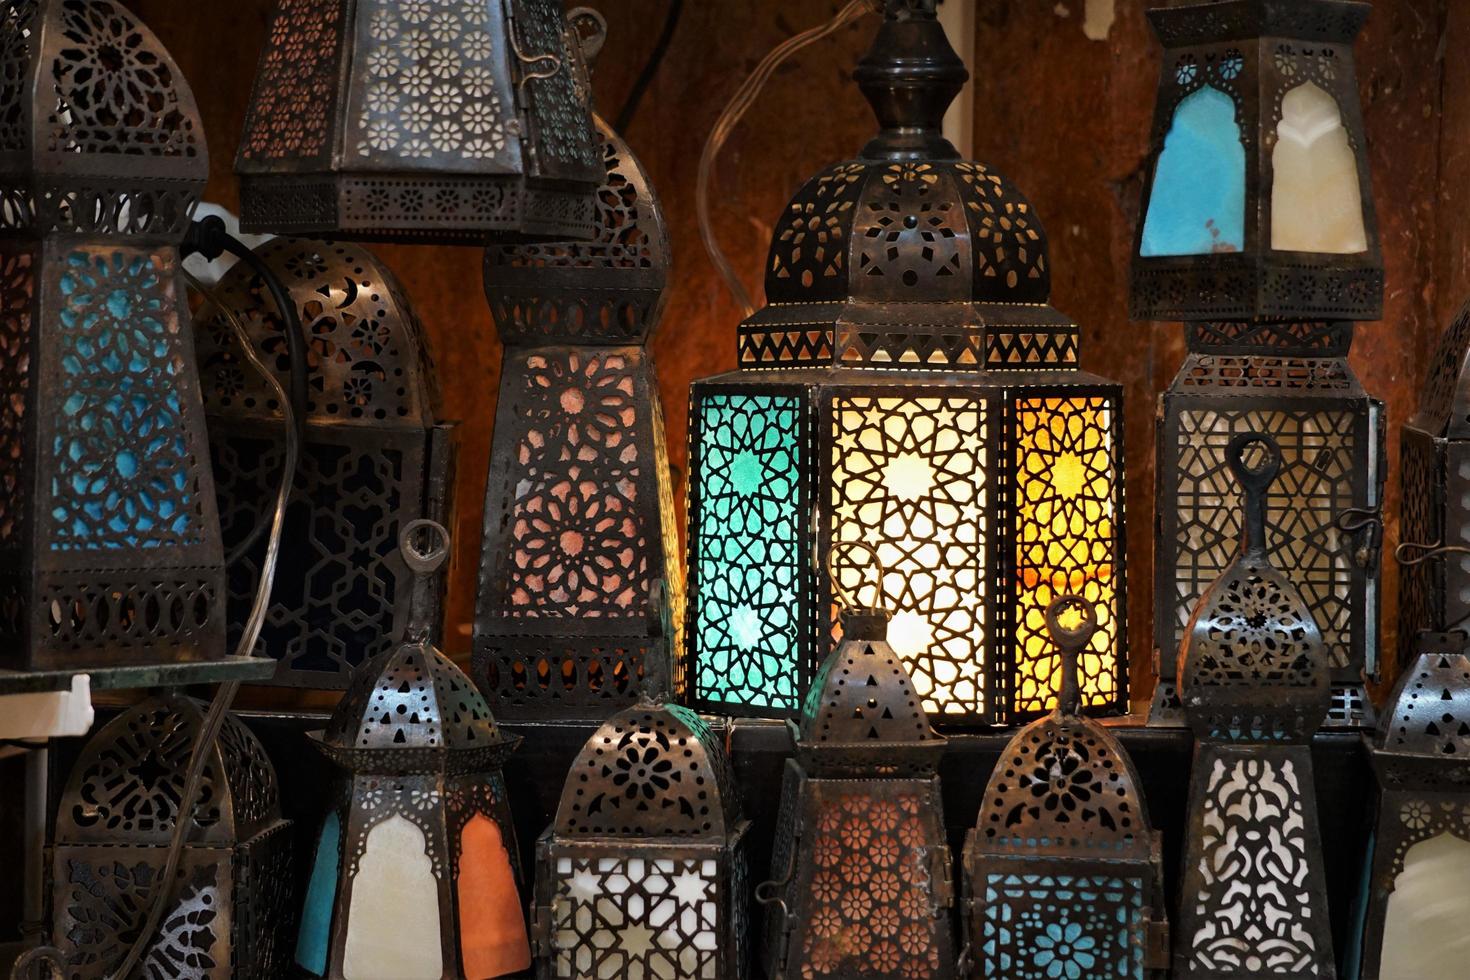 Oriental Decorations As Fanoos For Ramadan Month On The Market, Cairo Egypt. photo